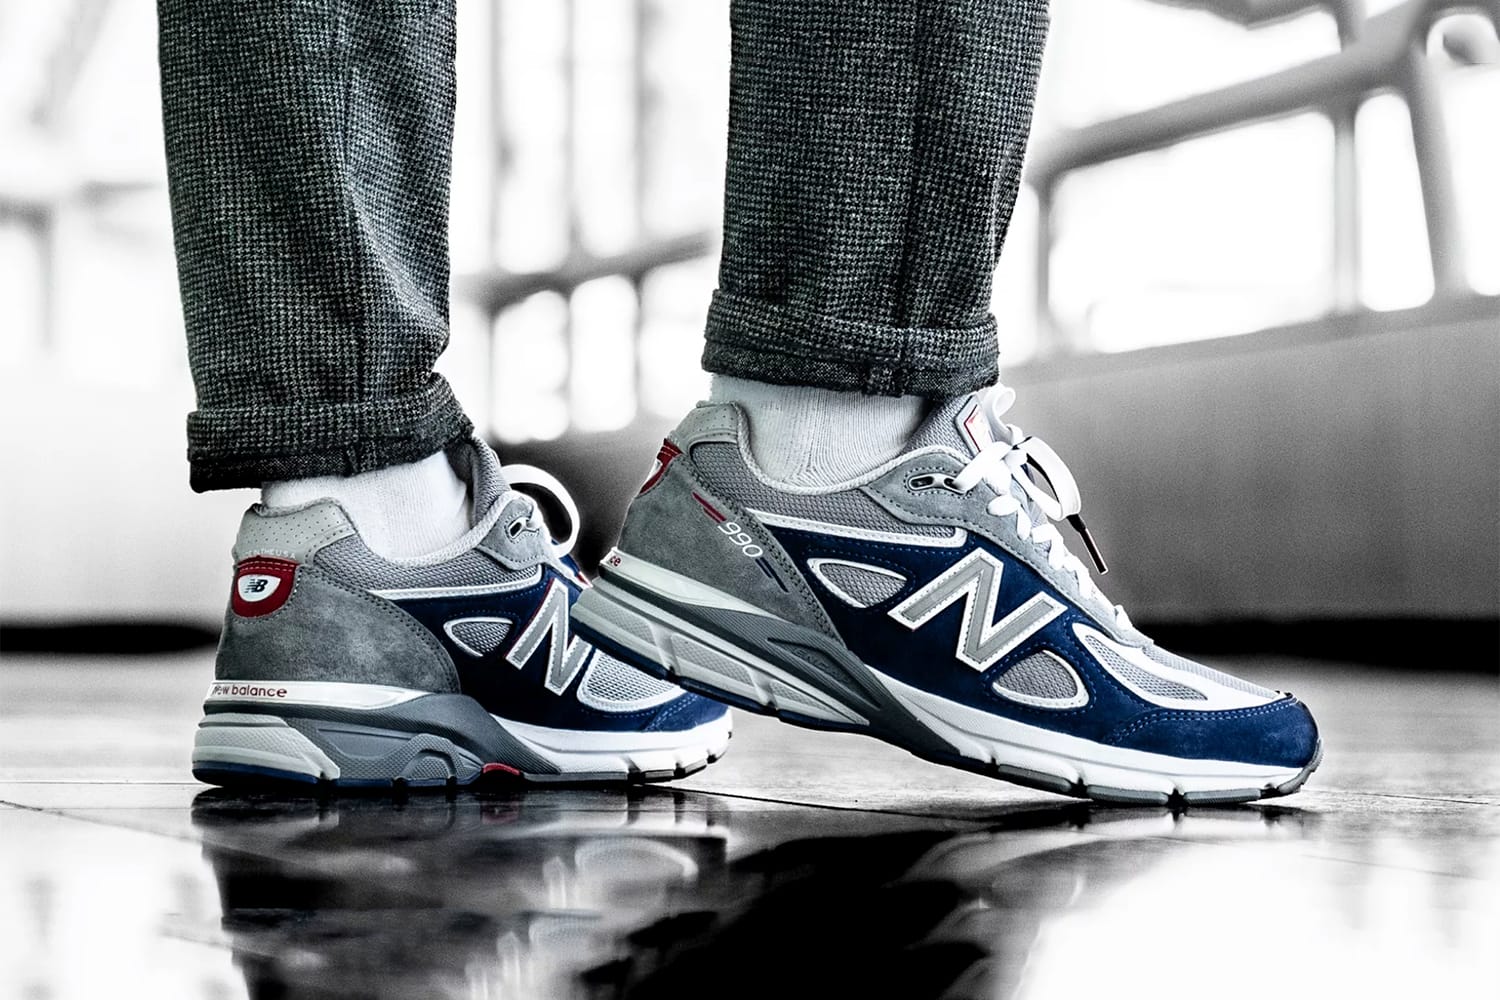 new balance 990 v4 sneakers